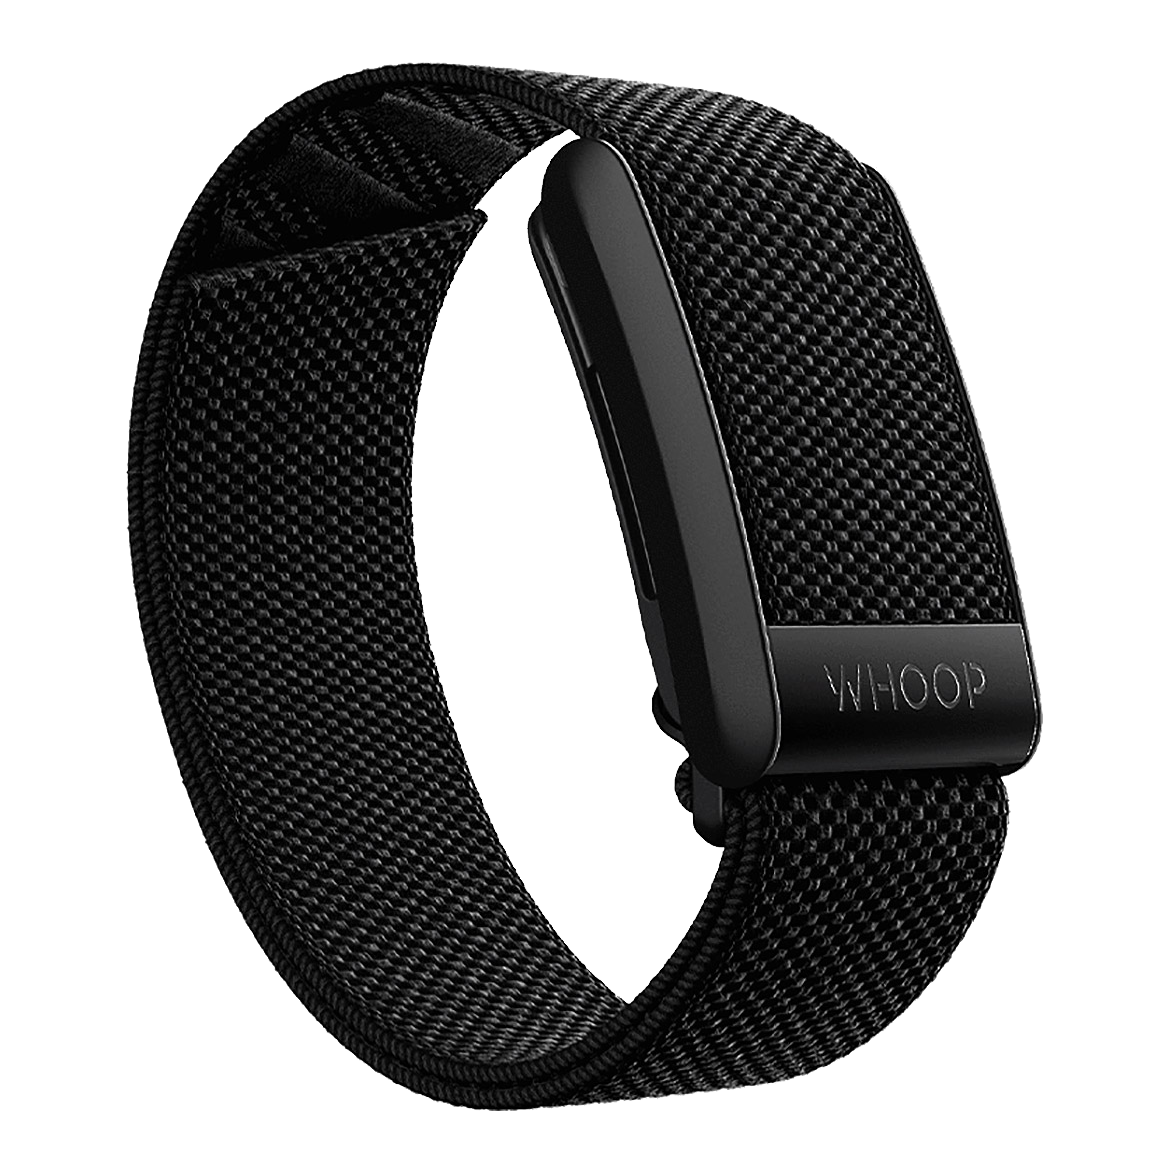 whoop fitness tracker cost